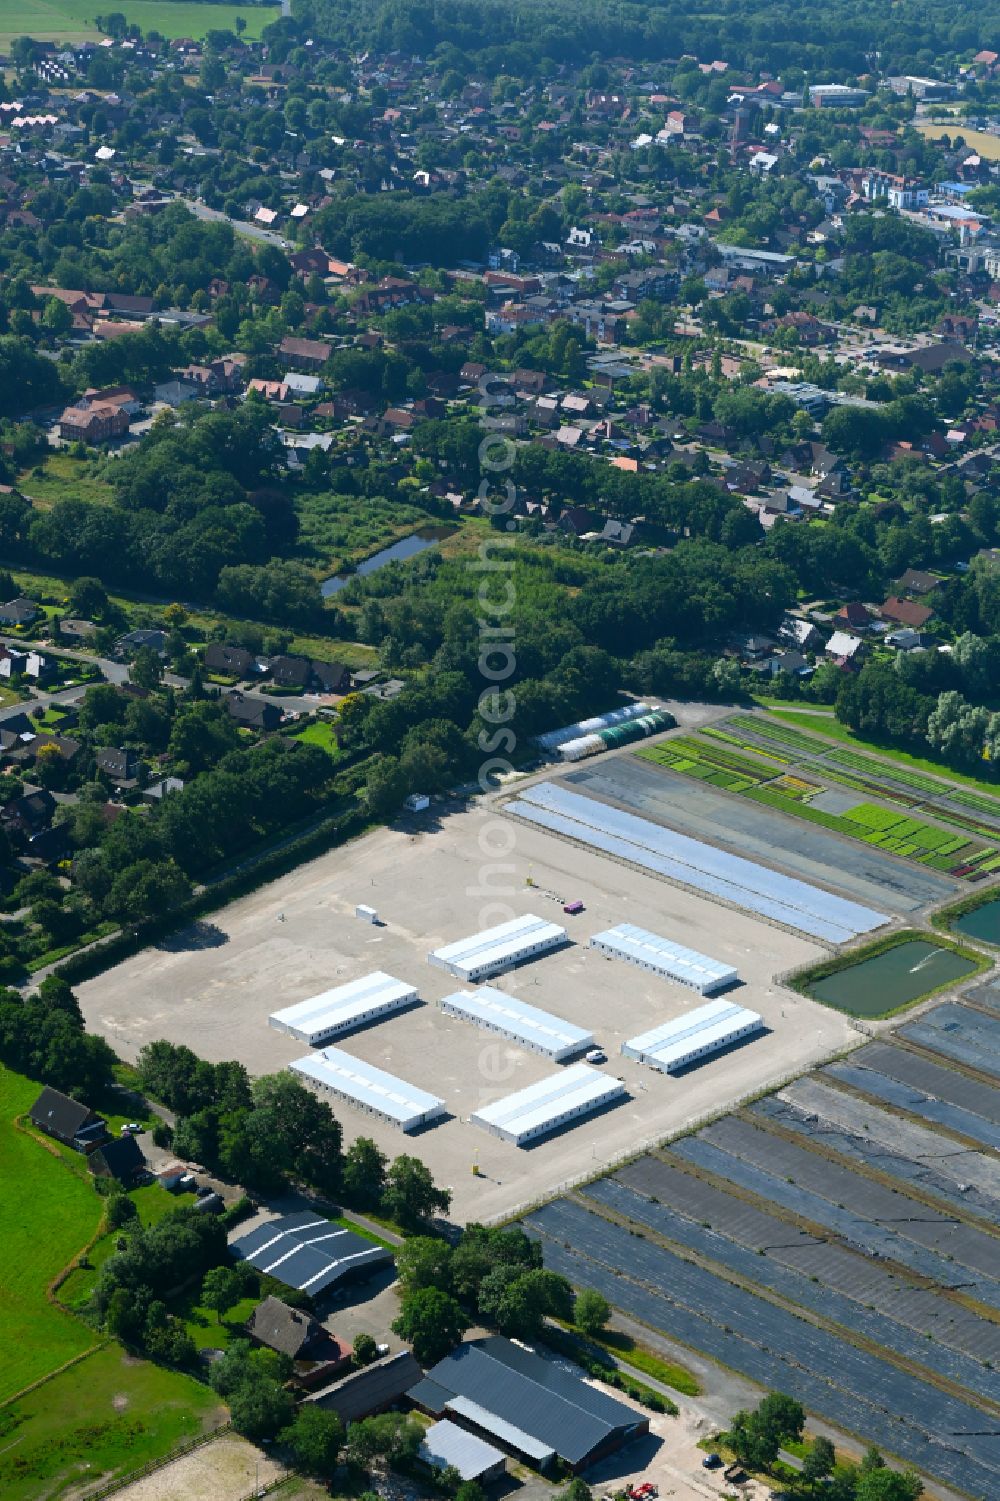 Edewecht from the bird's eye view: Container settlement as temporary shelter and reception center for refugees on street Logenring - Auf der Loge in Edewecht in the state Lower Saxony, Germany